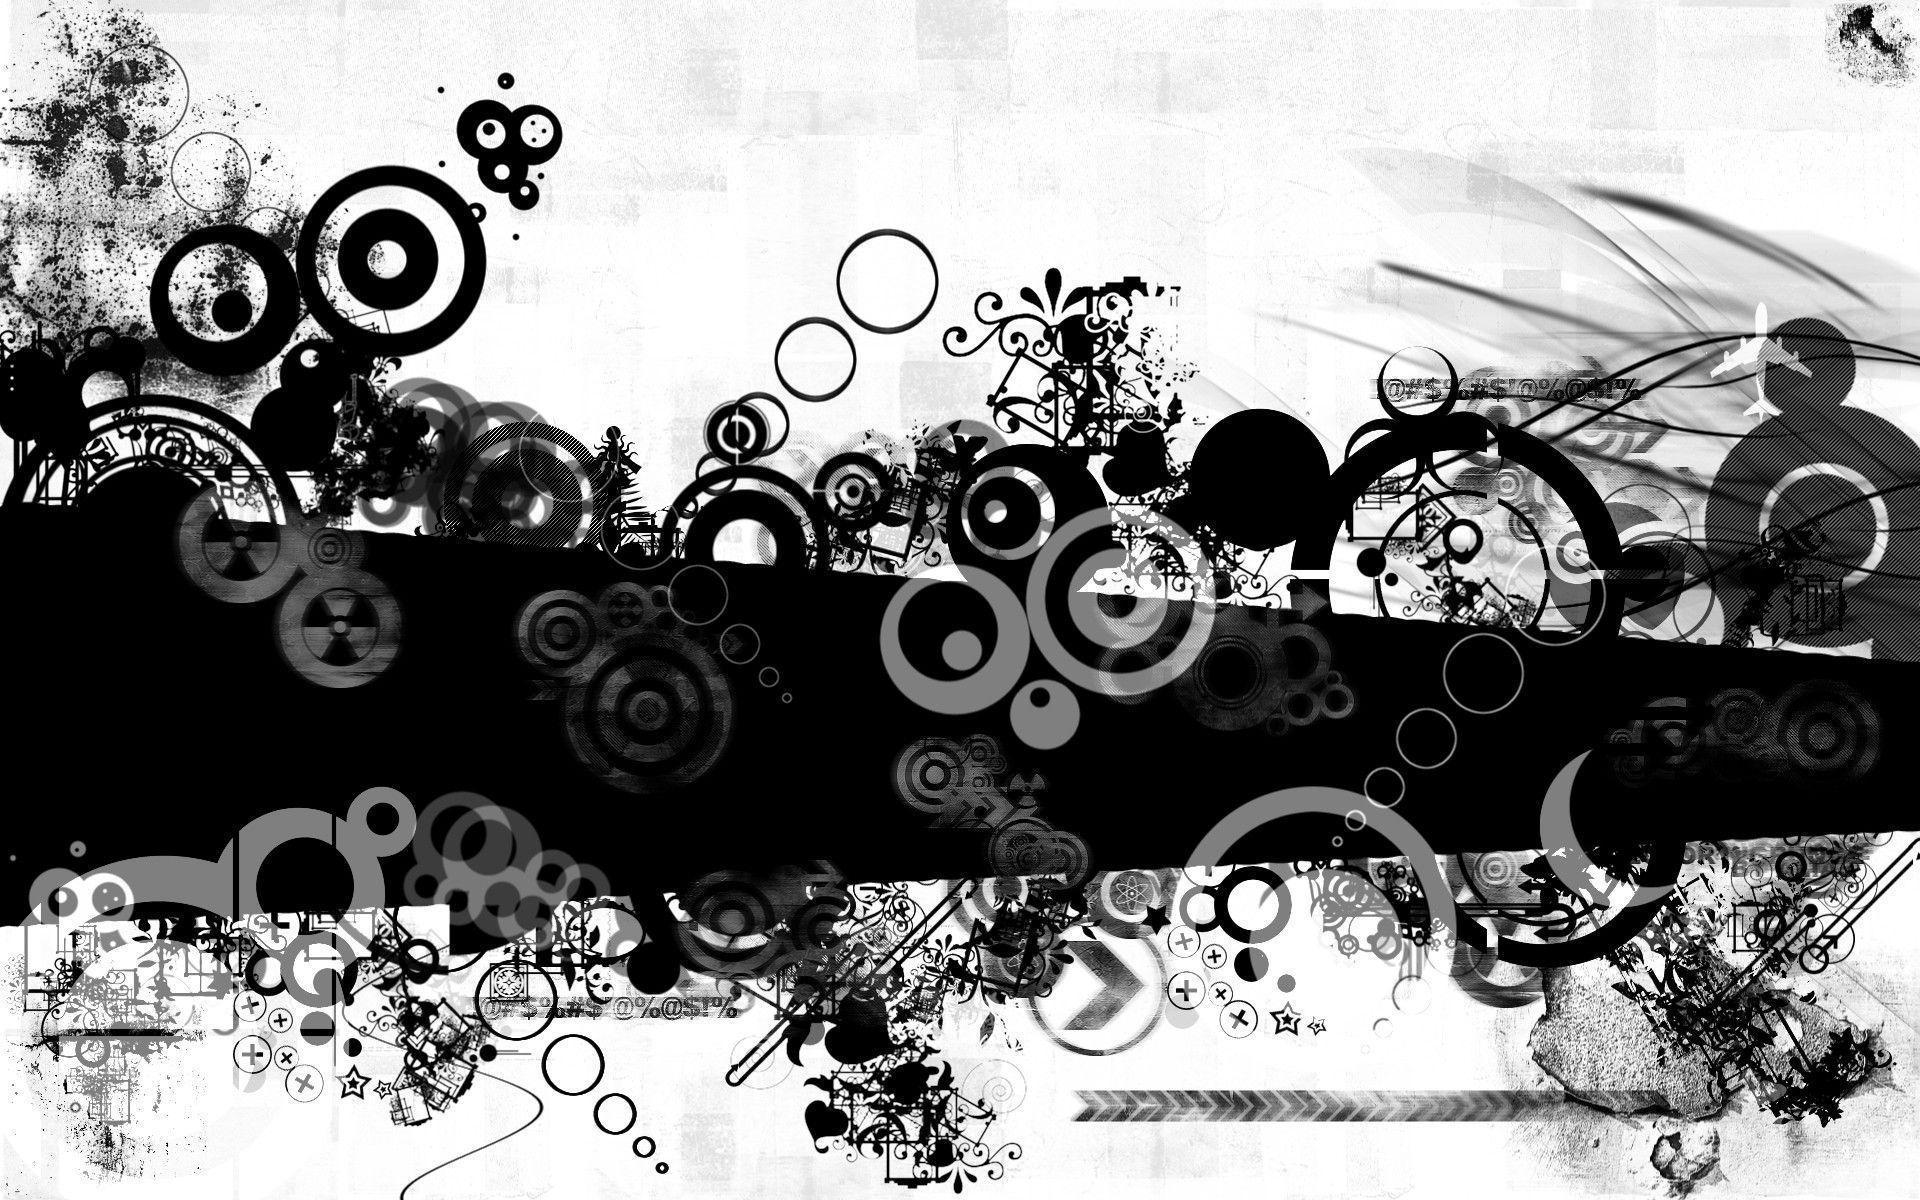 Black And White Abstract Wallpaper. High Definition Wallpaper